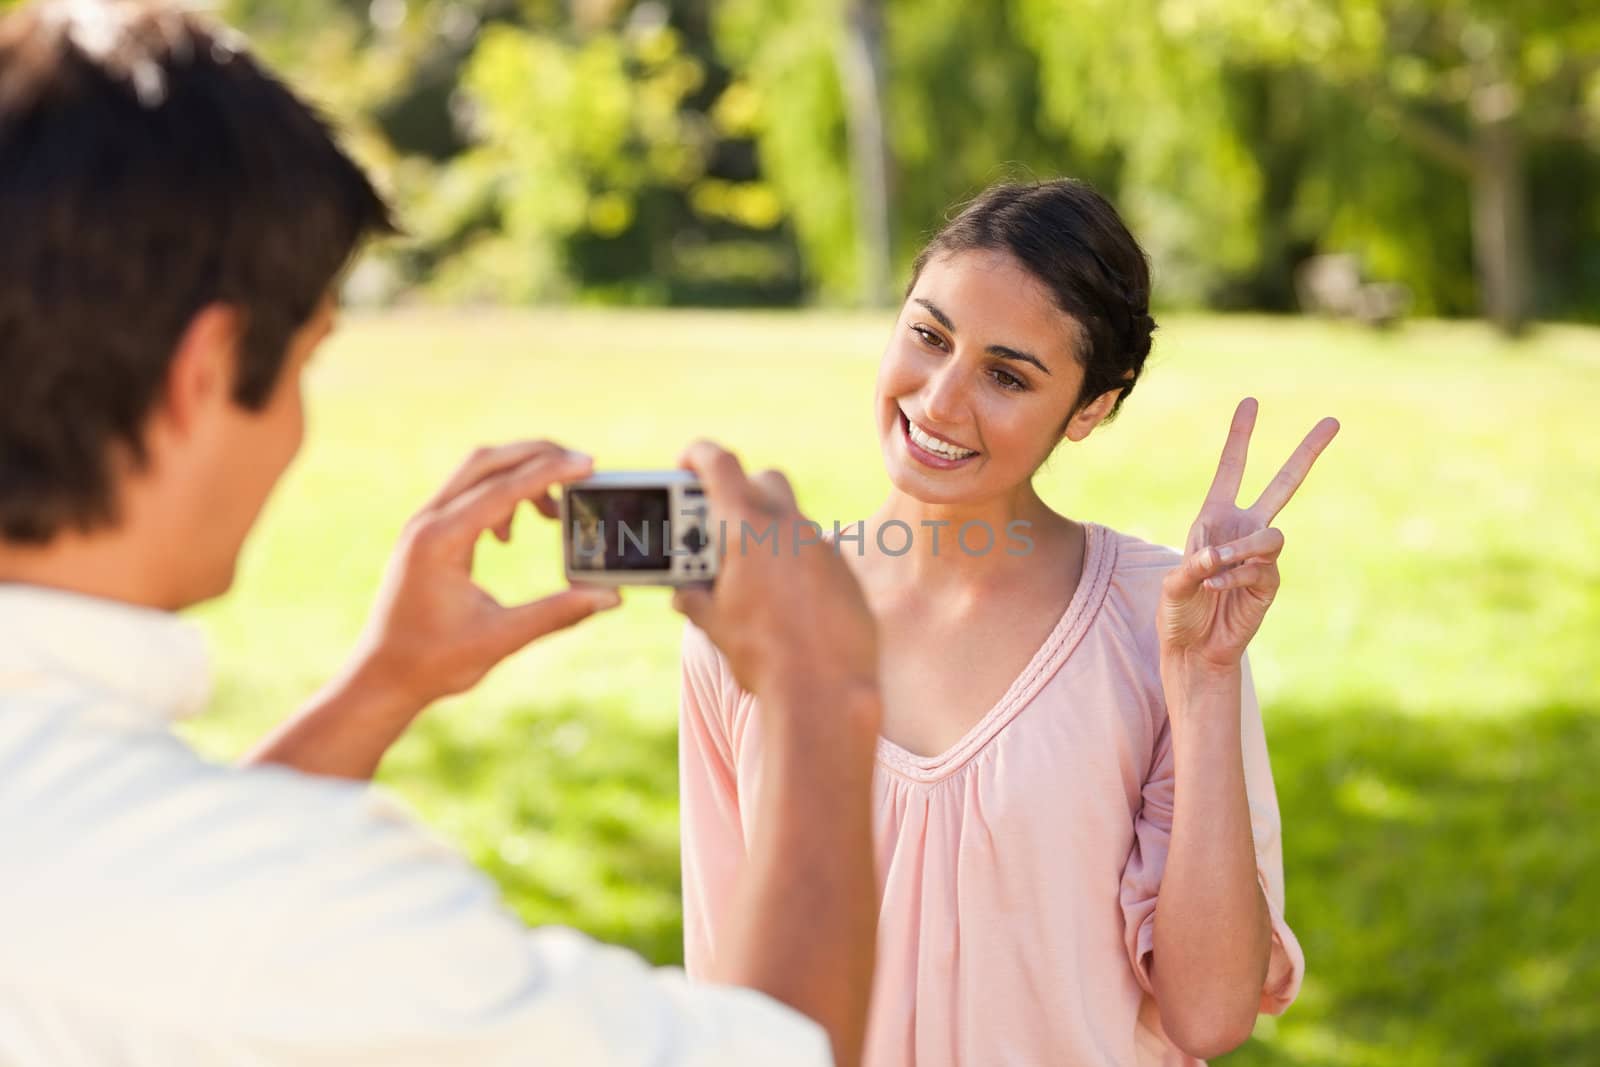 Man takes a photo of his friend giving the peace sign by Wavebreakmedia